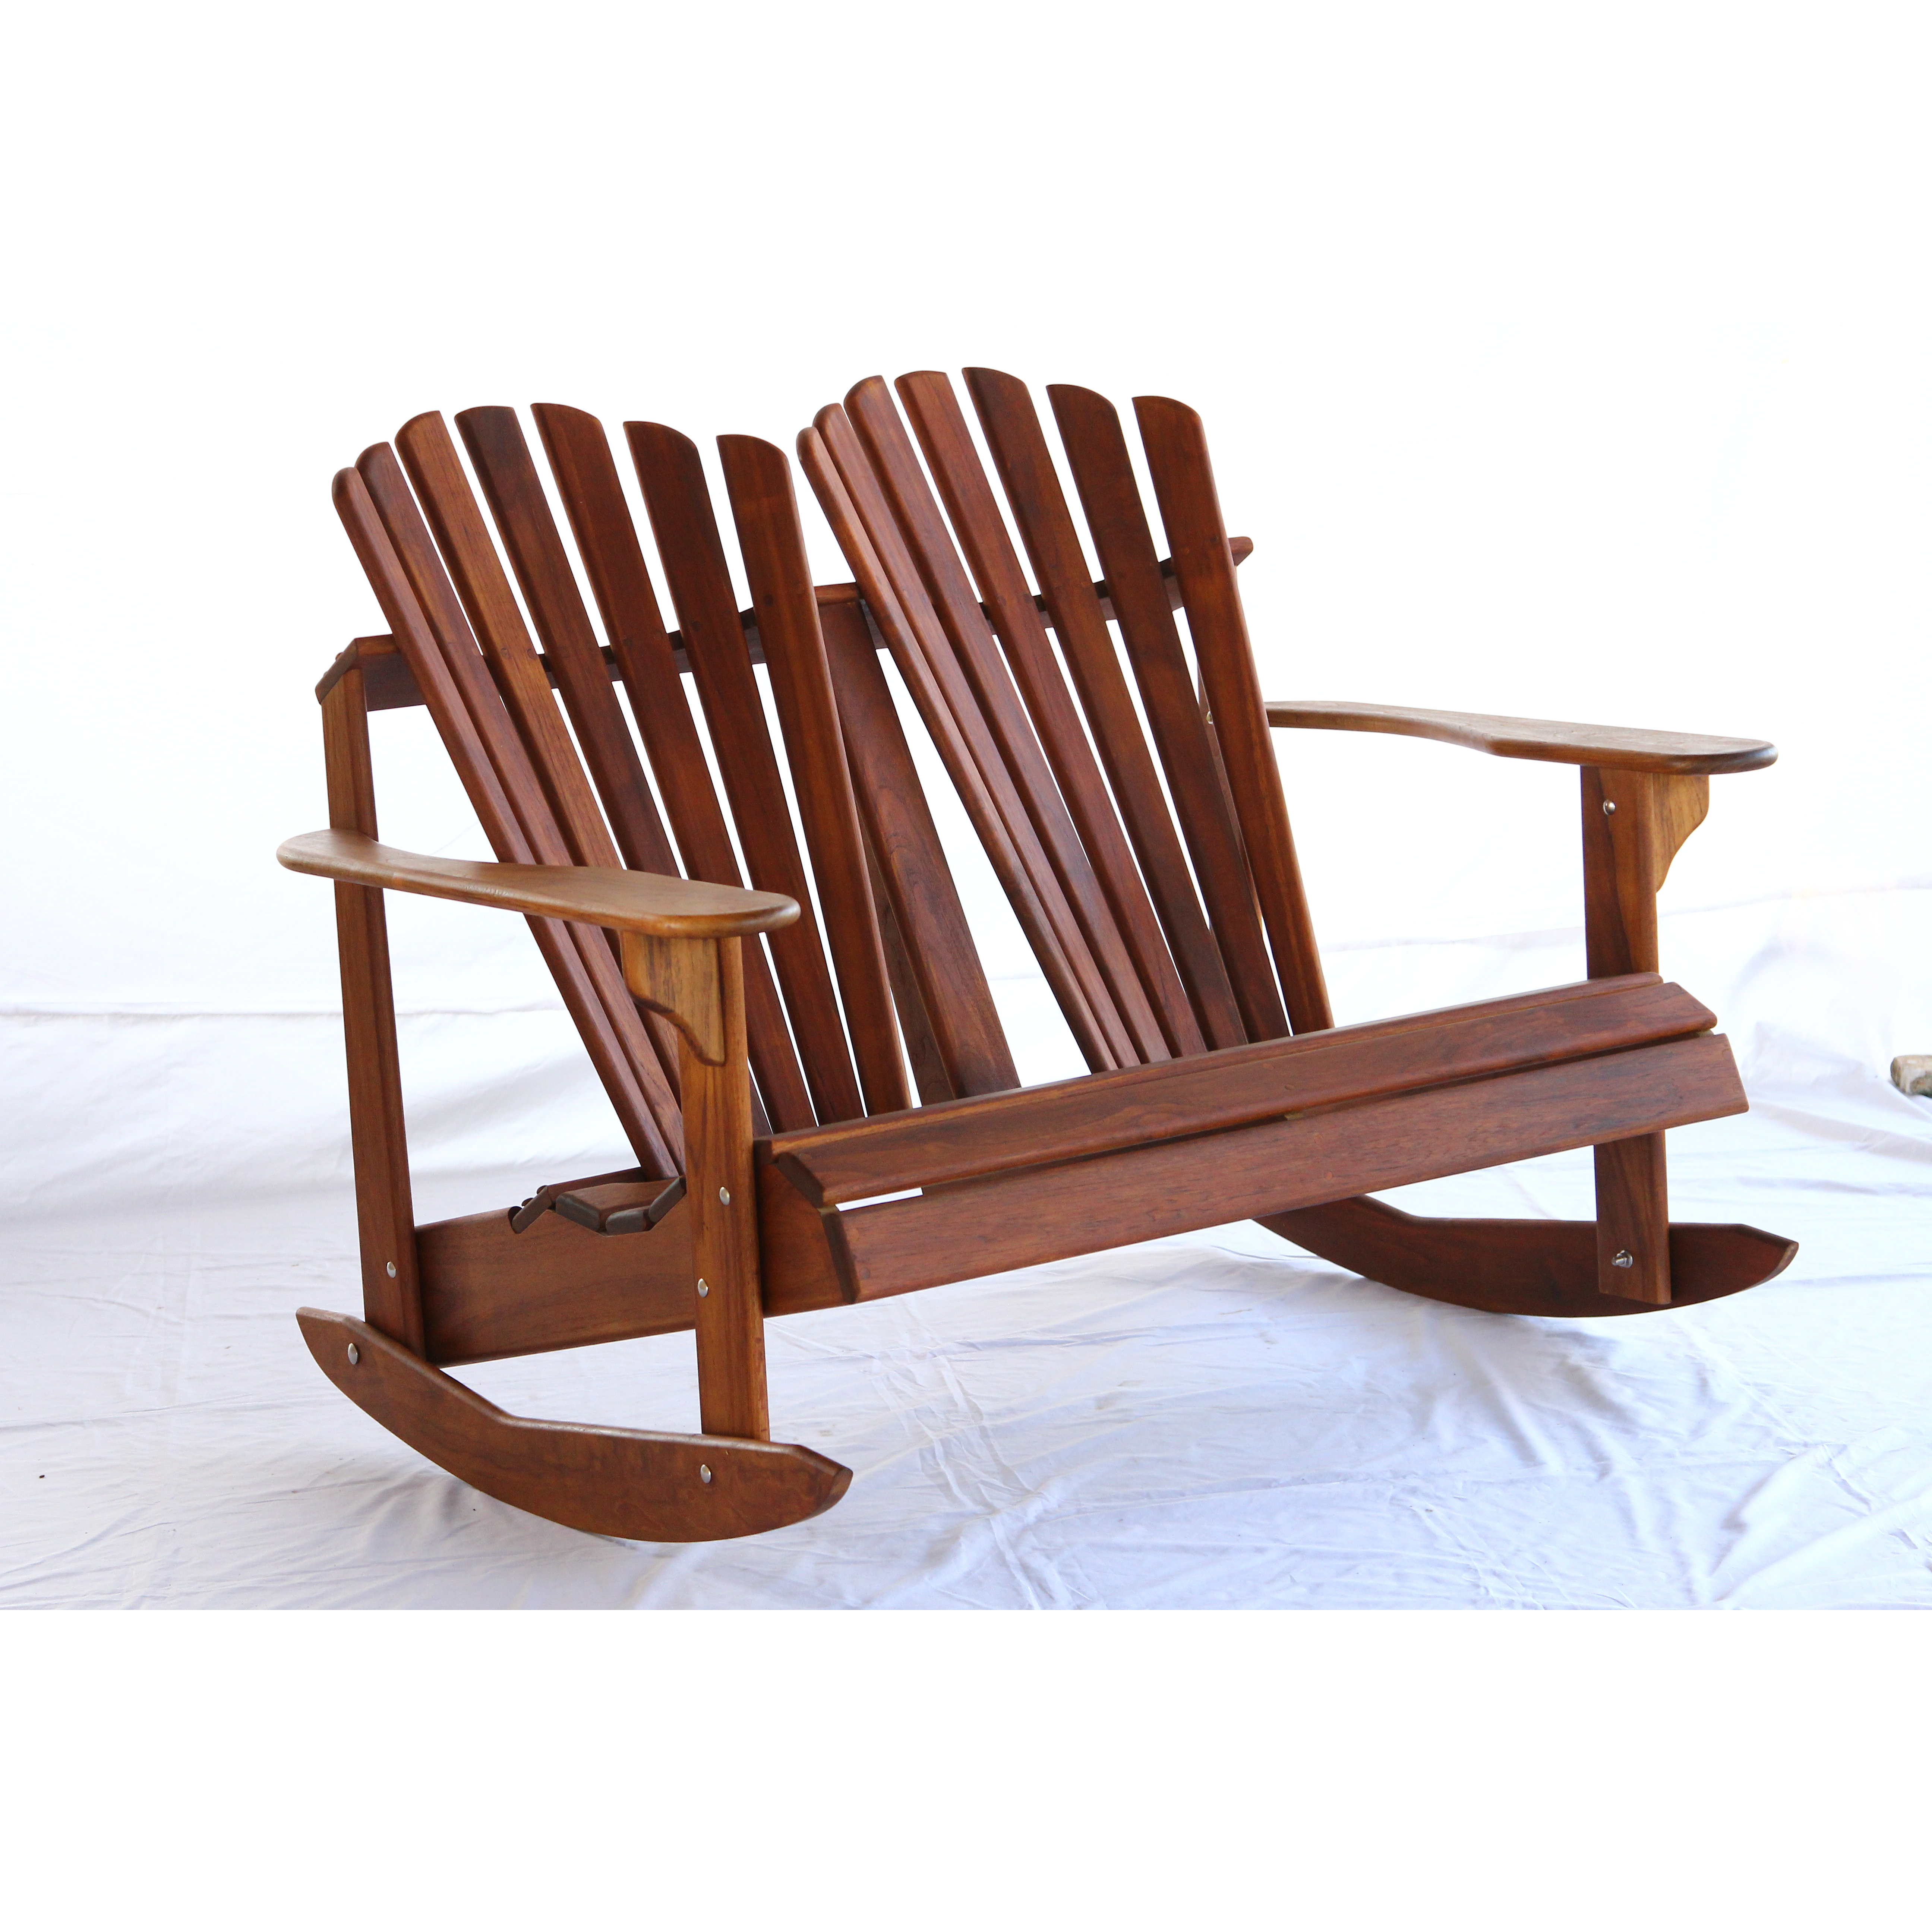 Hyre's Country Signature Teak Adirondack Double Back Rocking Chair